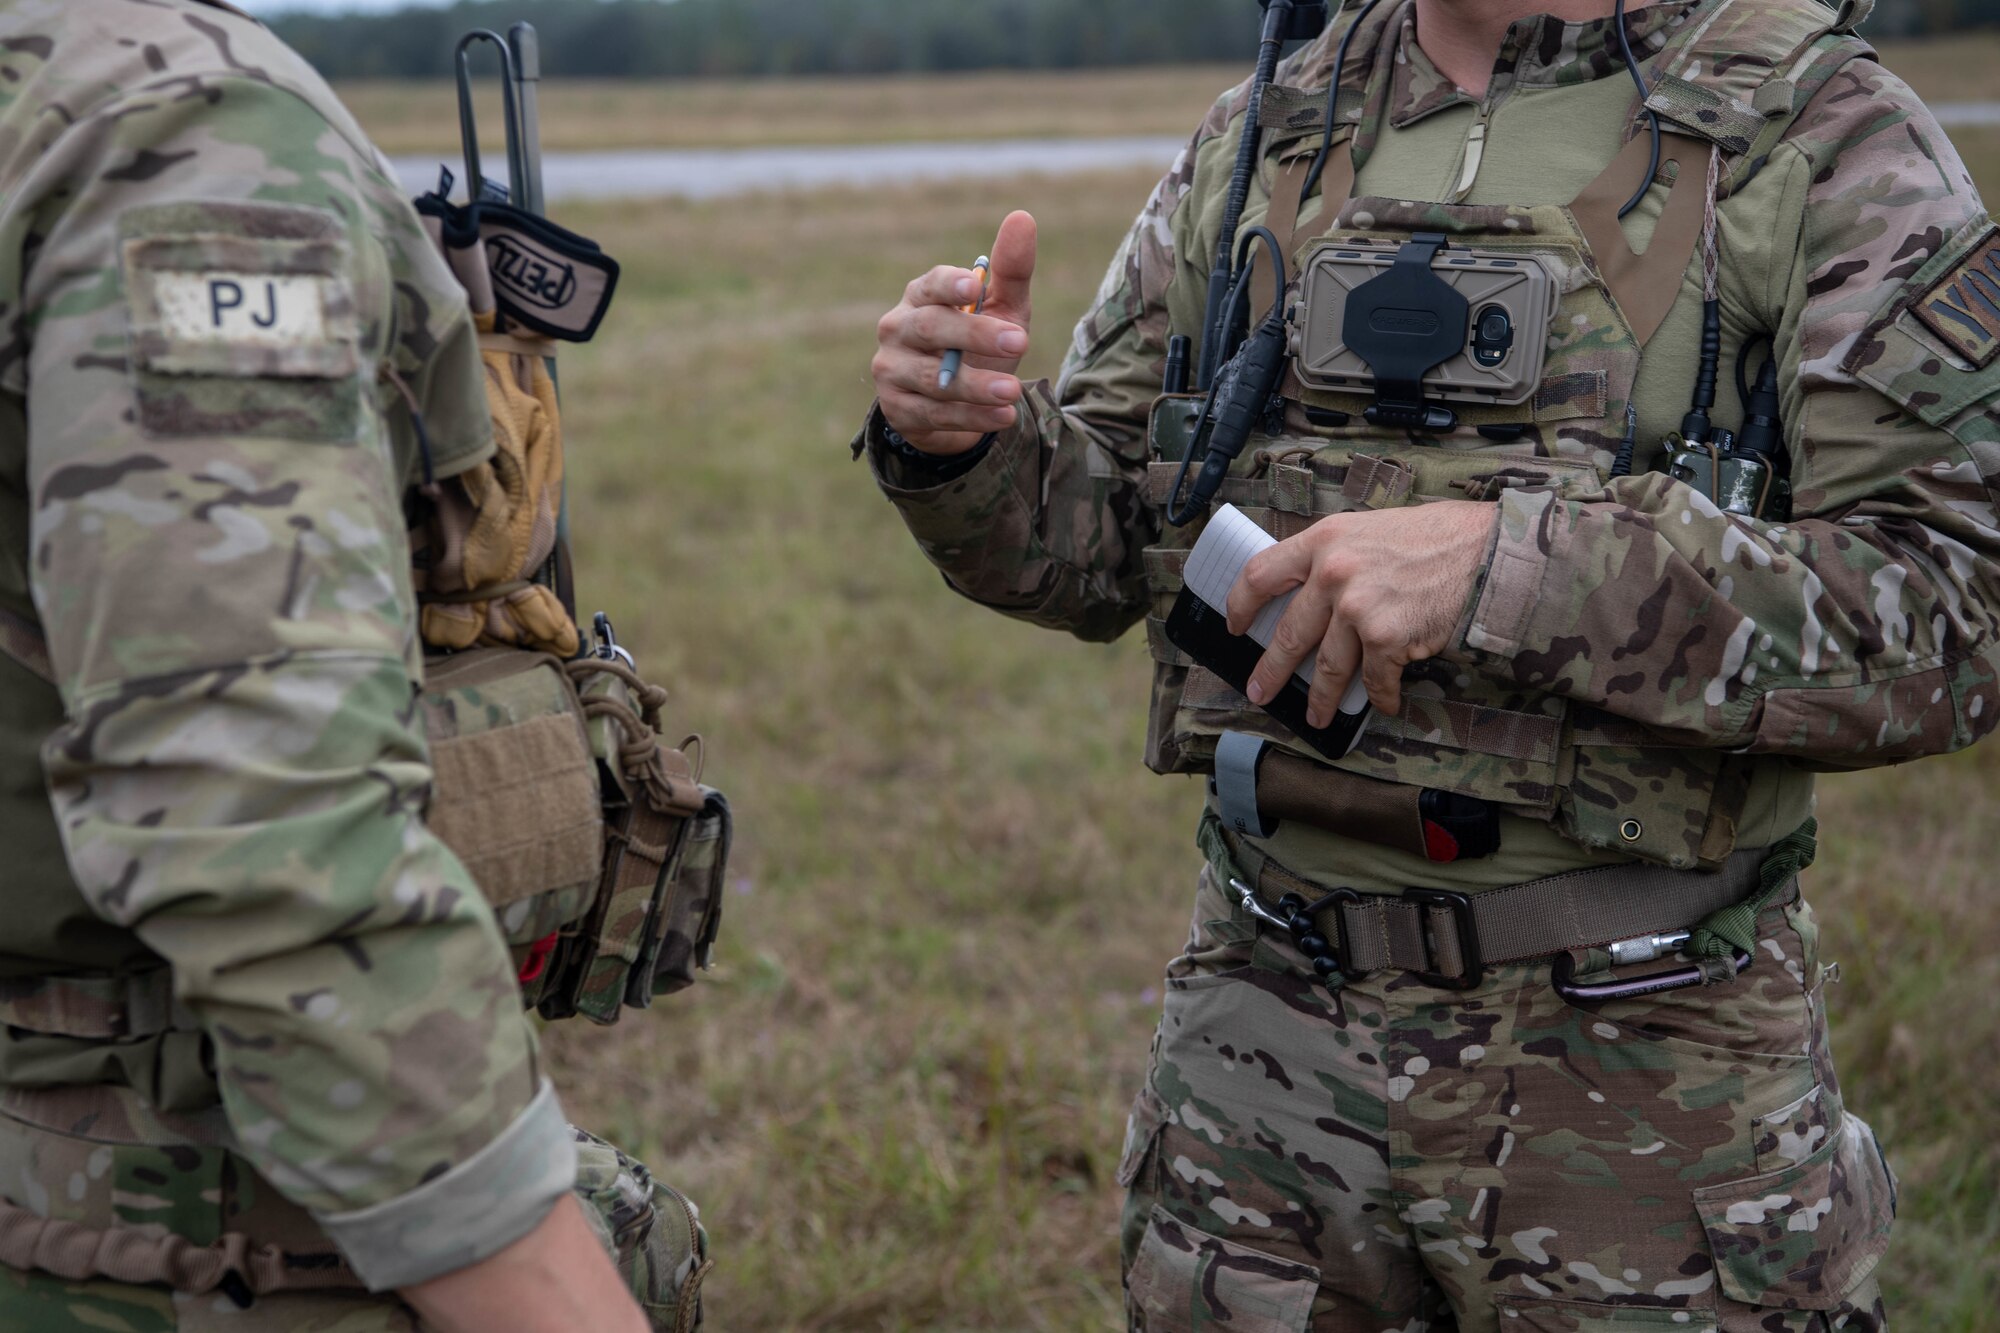 From the side we see the torsos of two Special Tactics operators as they exchange information. The operator on the right is using his hands to make a point as he talks. We can see the "PJ" shoulder patch insignia on the operator on the left indicating that he is a "pararescue jumper."